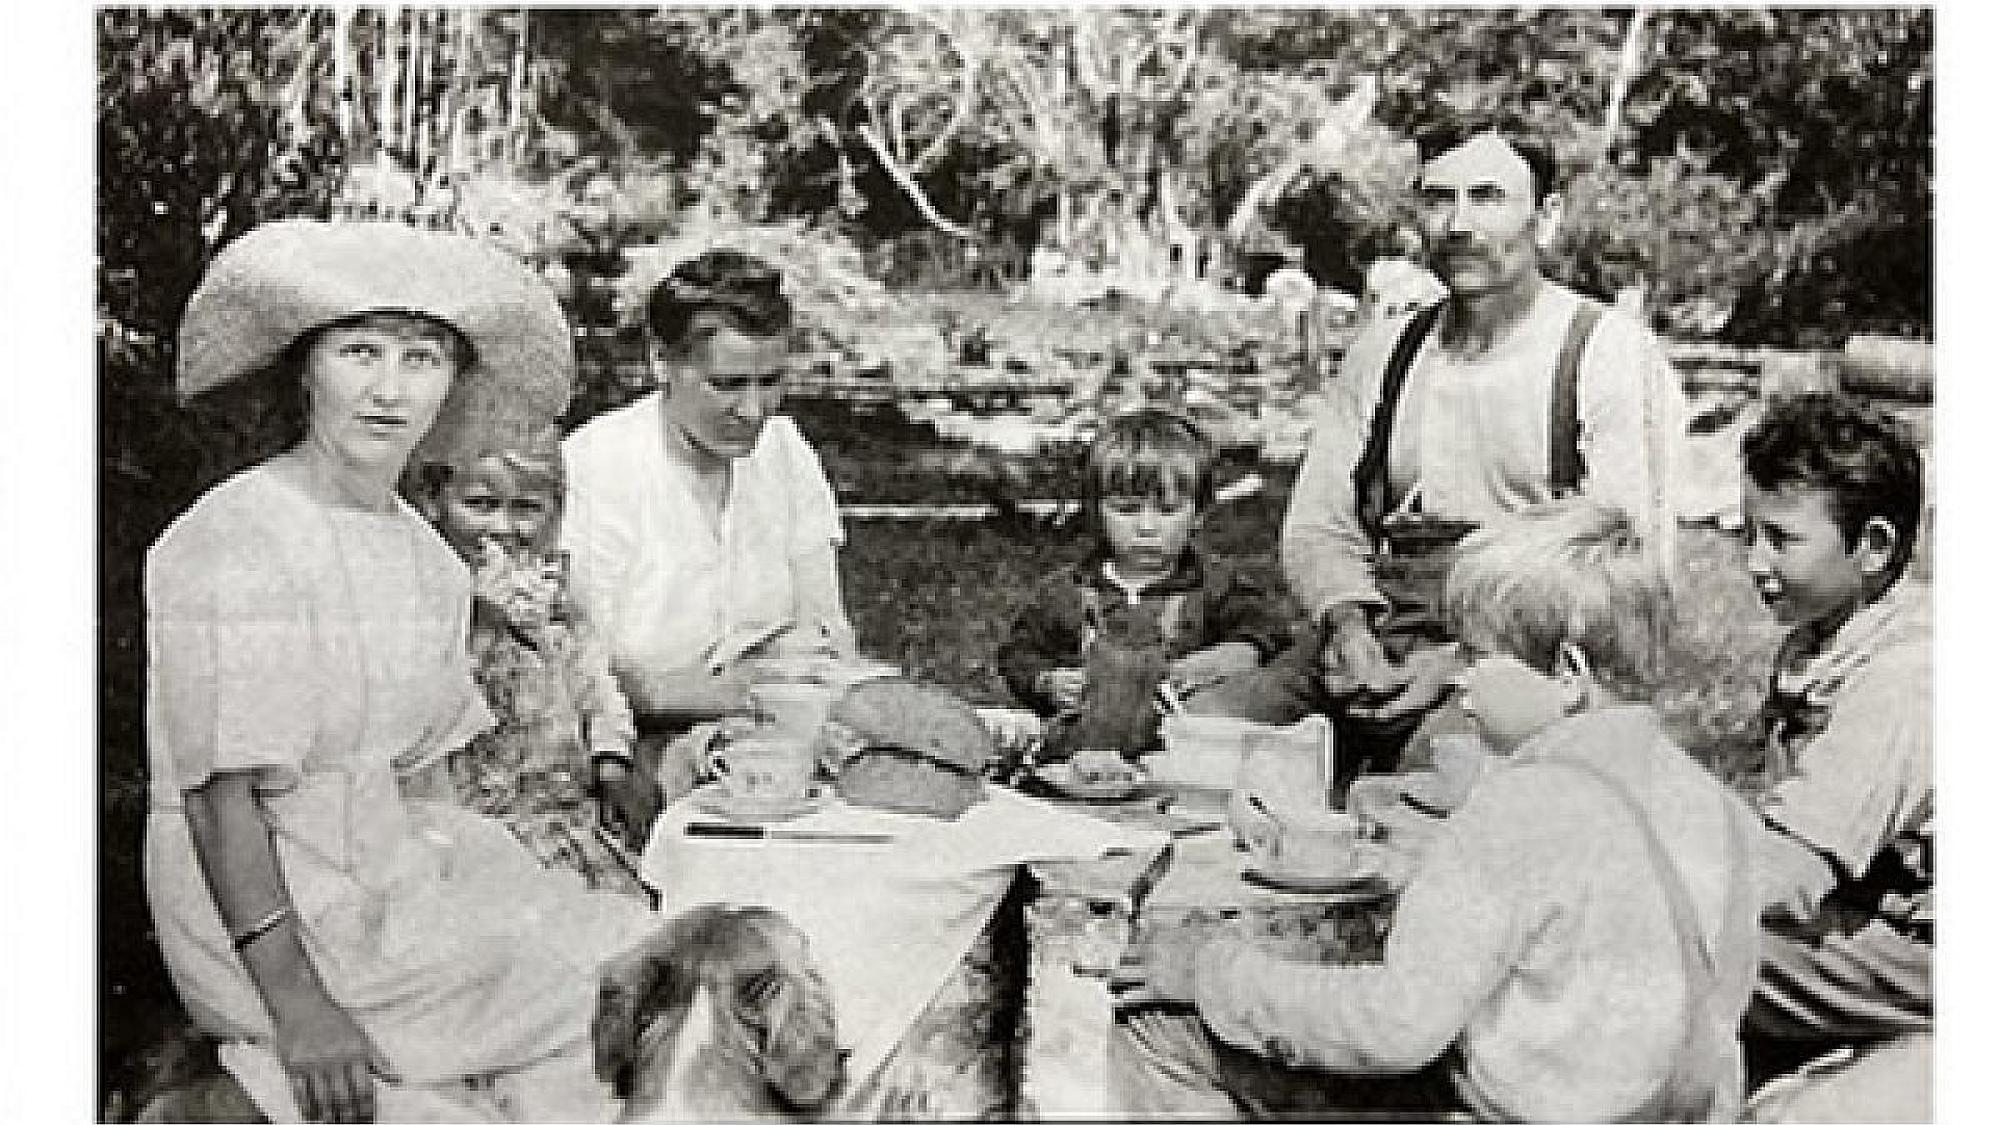 A vintage photo of a family eating outside.